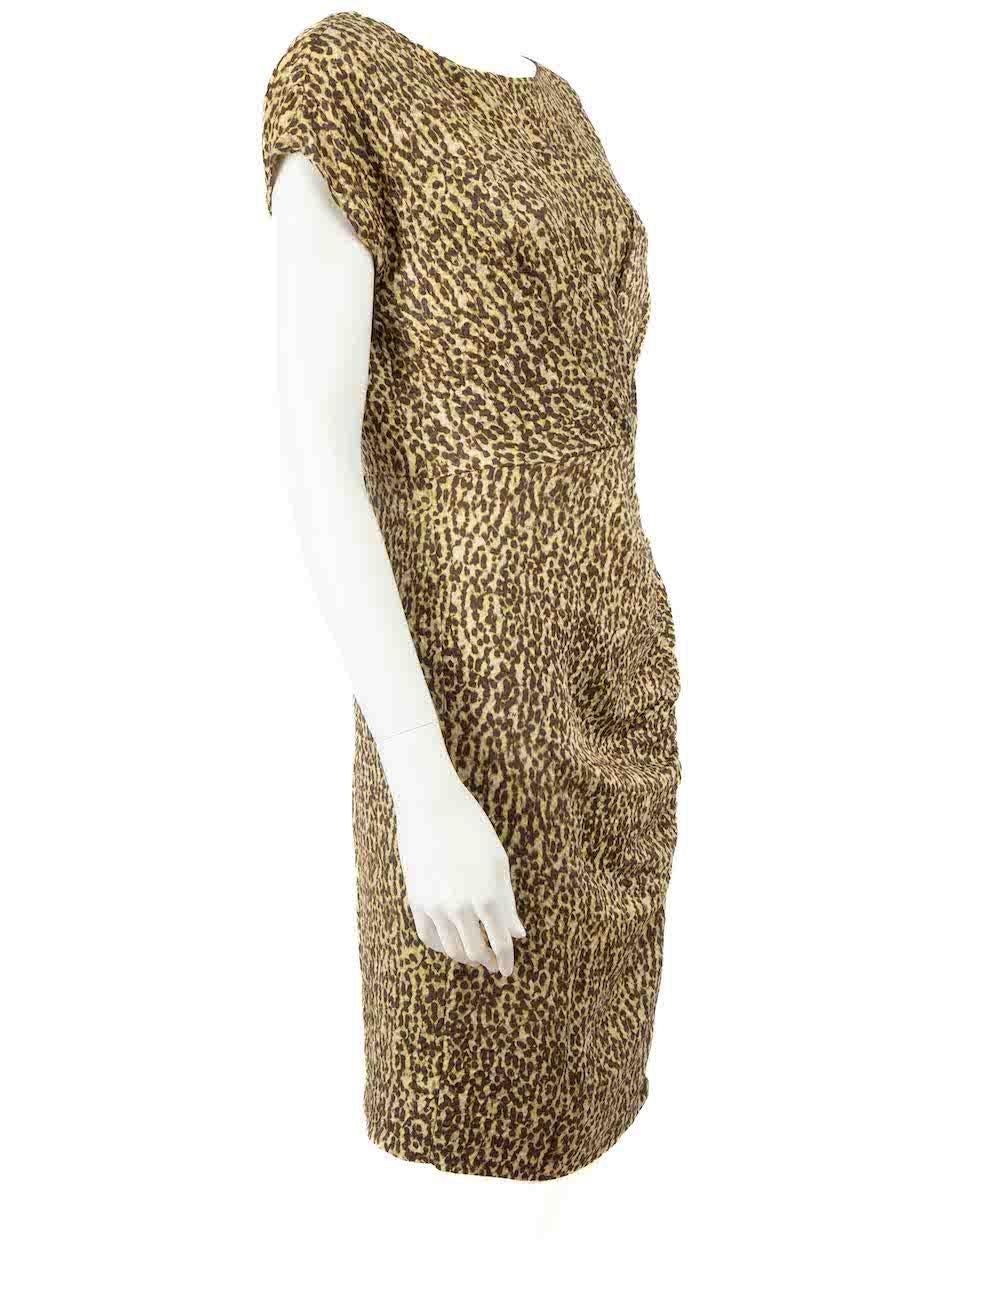 CONDITION is Very good. Minimal wear to dress is evident. Minimal wear to the front and back with pulls to the weave on this used Carolina Herrera designer resale item.
 
 Details
 Multicolour
 Wool
 Dress
 Leopard print
 Knee length
 Short sleeves
